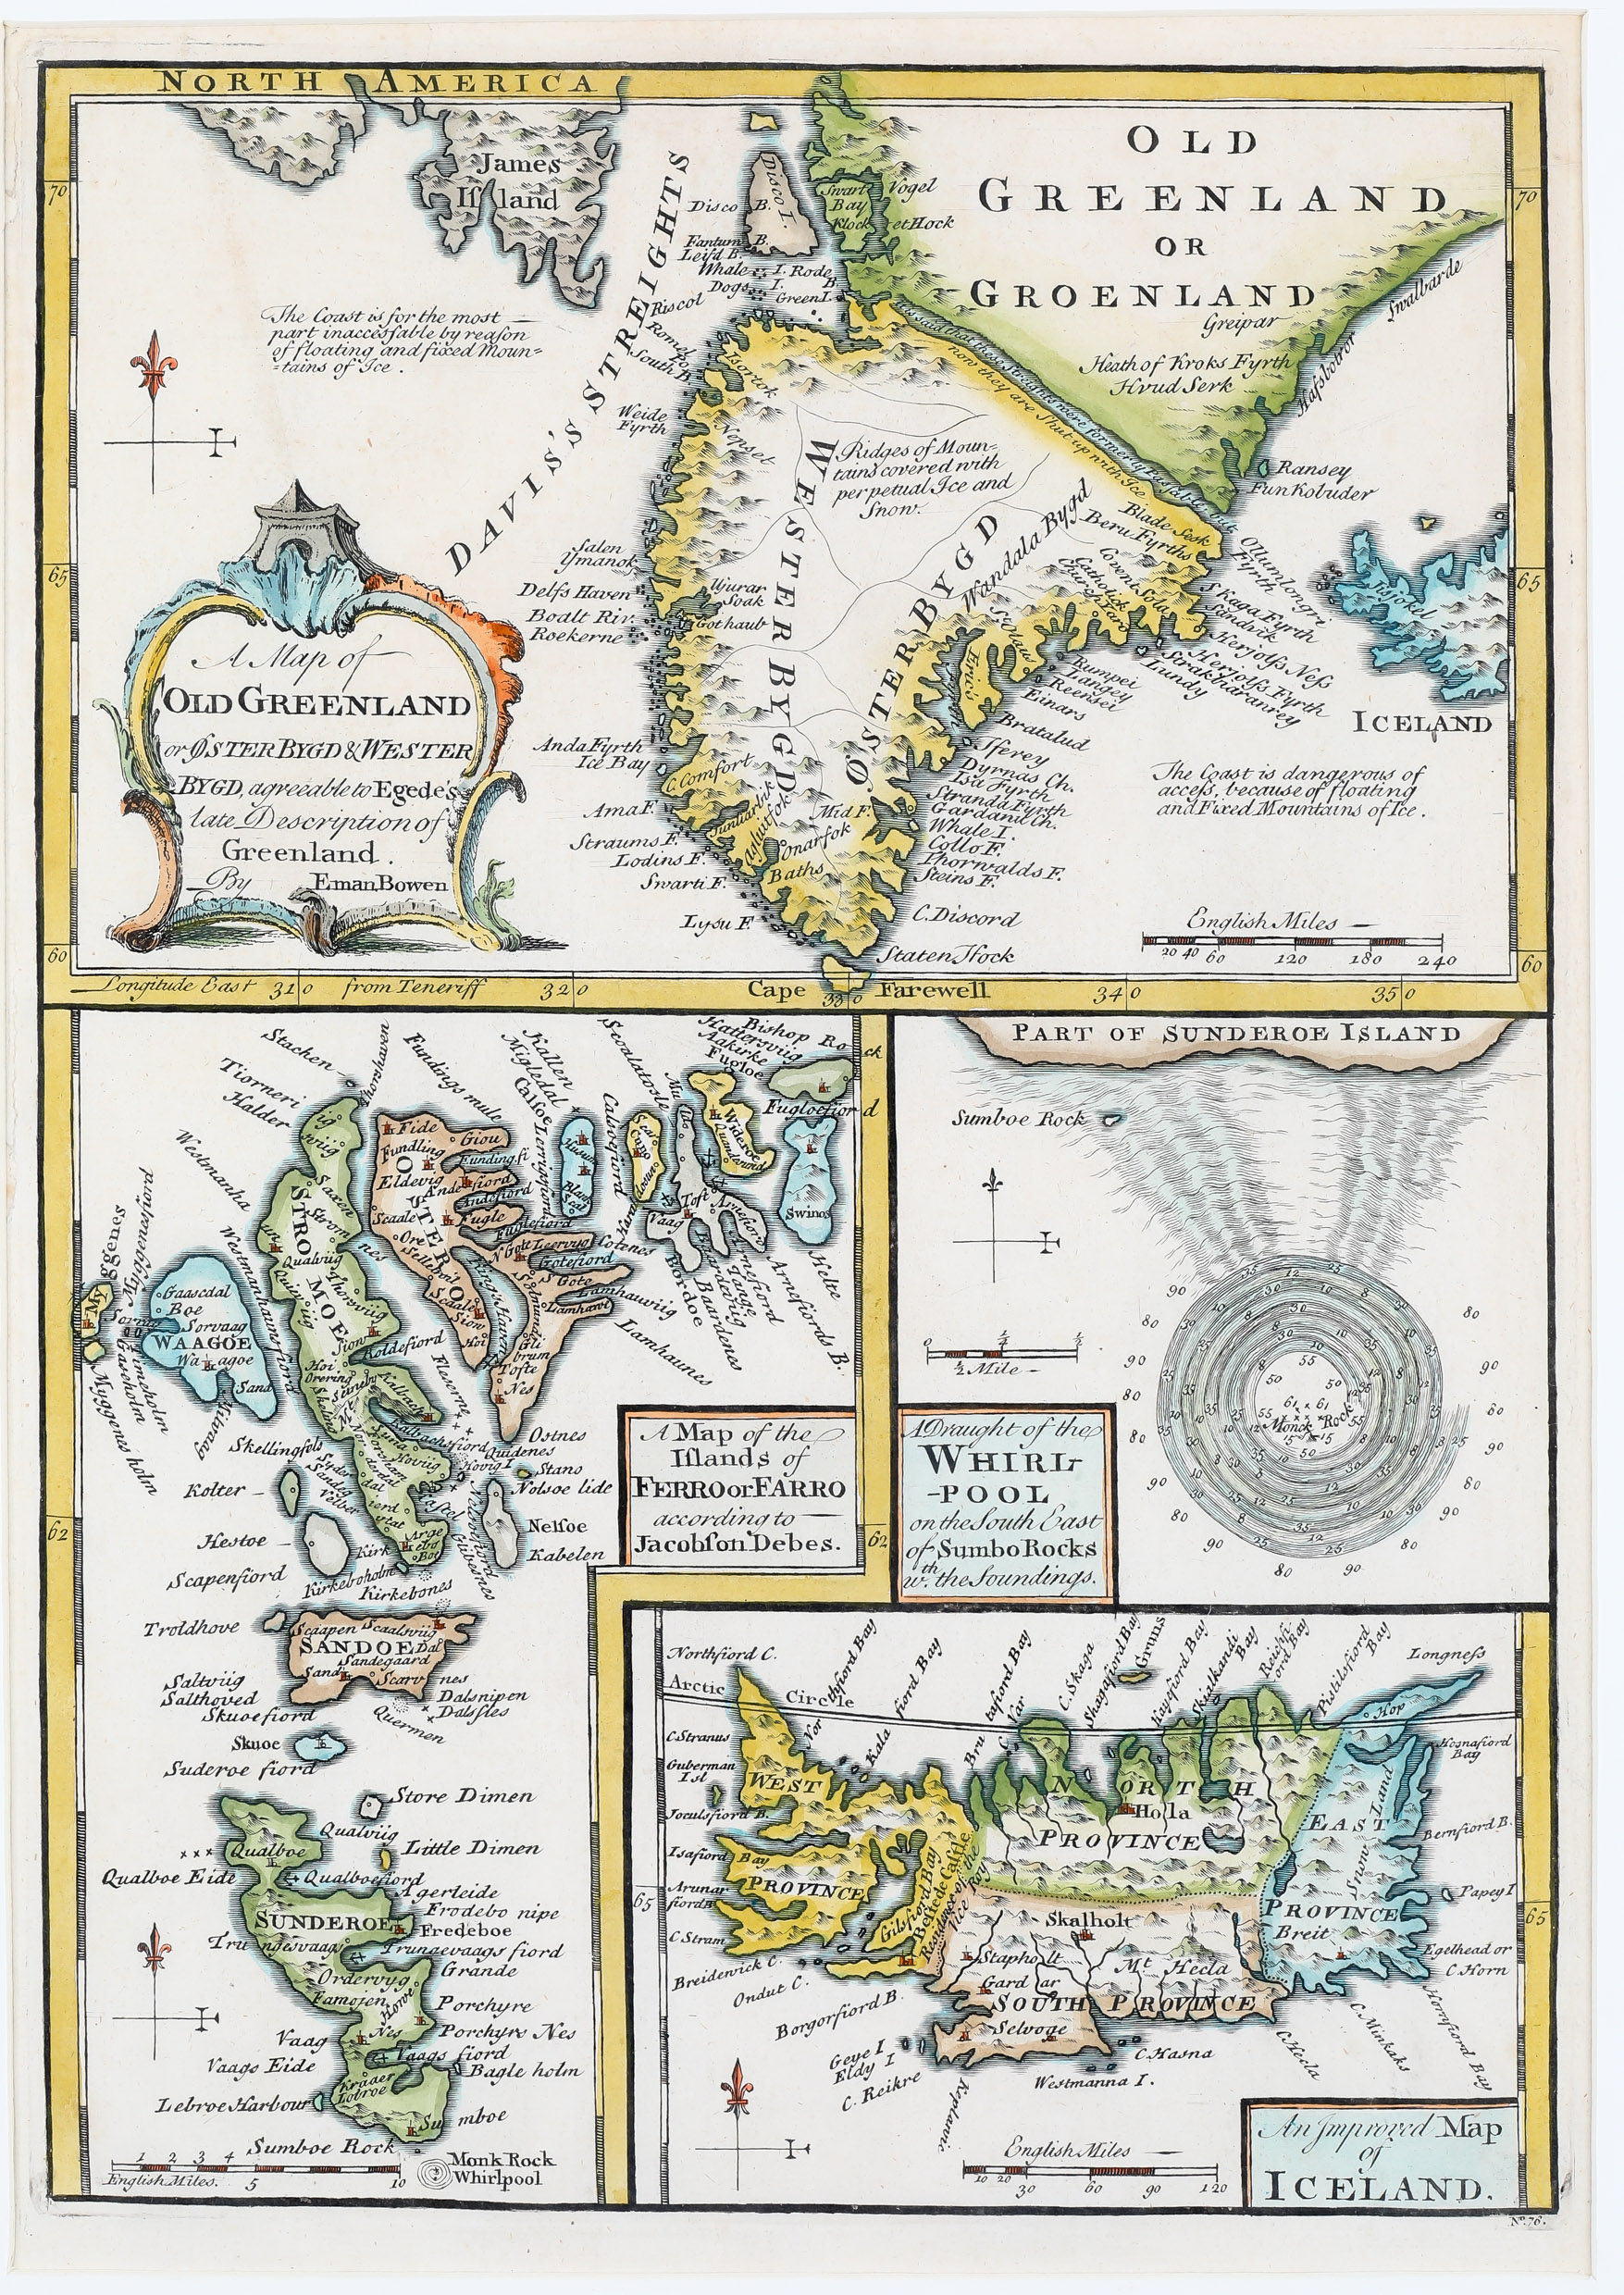 41. A Map of Old Greenland or Oyster Bygd & Wester Bygd